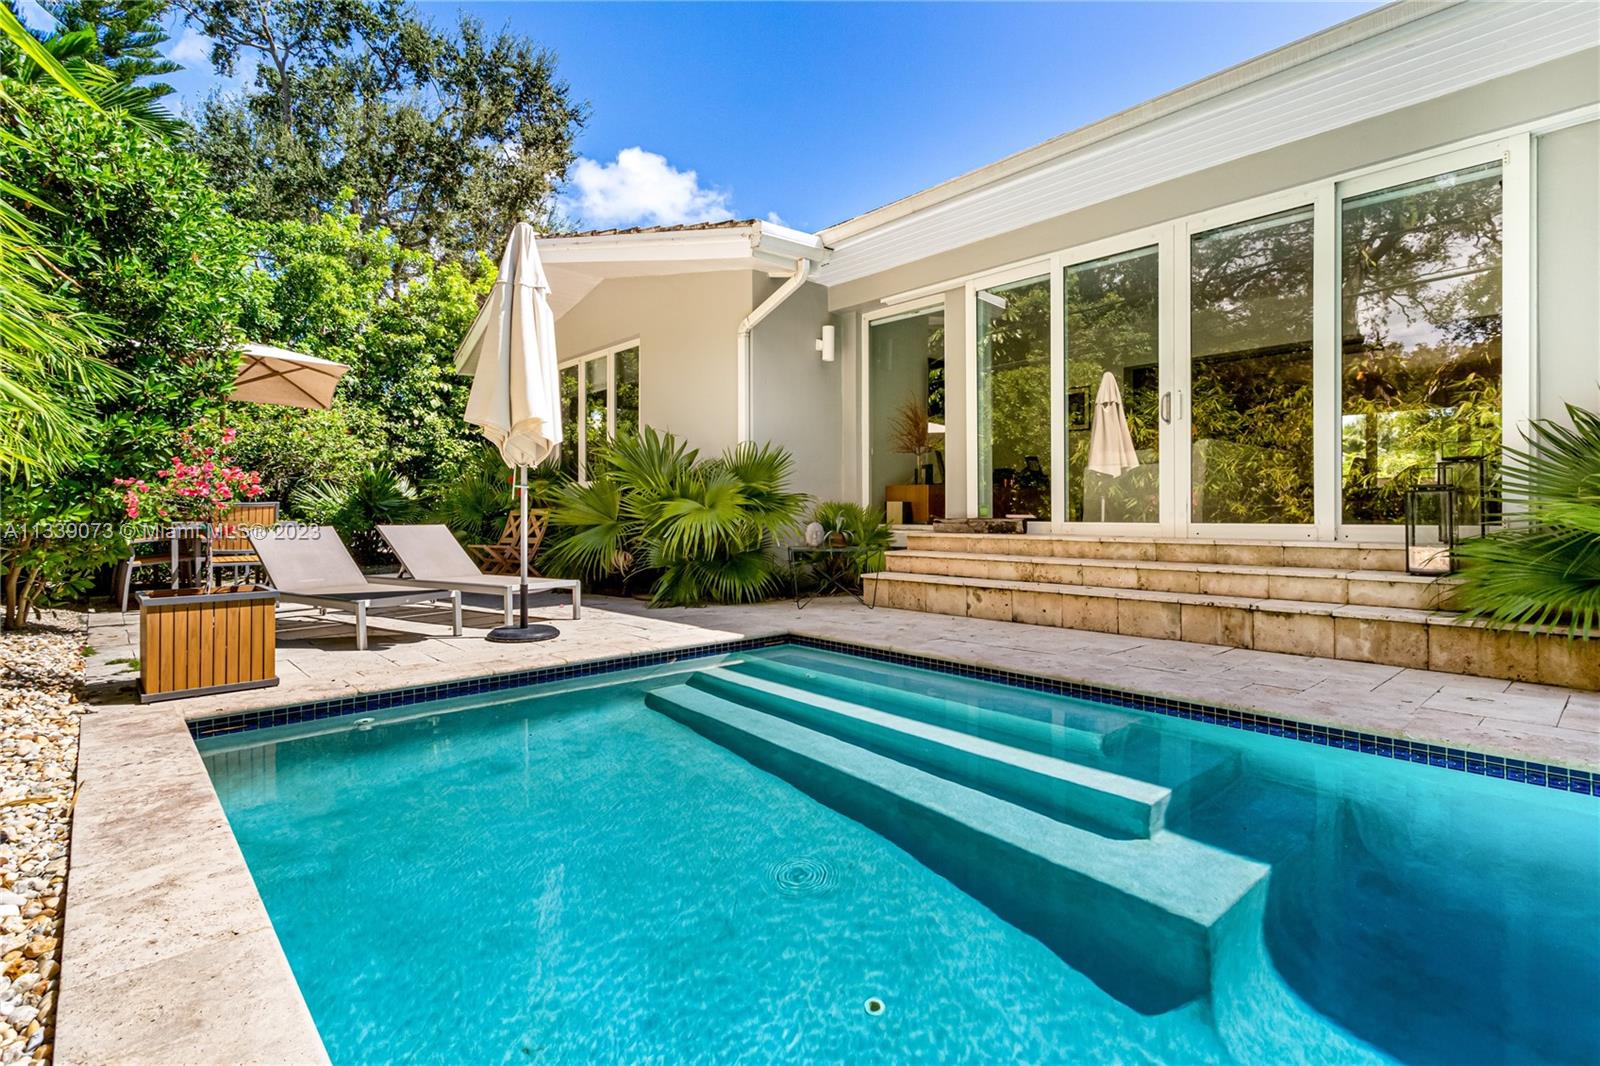 Modern tropical oasis in the heart of Coconut Grove! This stunning mid century modern home features 4 bedrooms, 3 baths, gourmet chef's kitchen. Sprawling 3000 sq ft open floor plan, incredible natural light, all impact windows and doors, sparkling pool, patio, bbq, lush gardens and 2 car garage. Located in prestigious Bay Heights a walled community with 24 hour patrol, minutes to Downtown Brickell, steps to all the best marinas, miles of waterfront parks, world class shopping and dining, great entertainment, the best schools in the city. This is the ultimate Miami lifestyle.